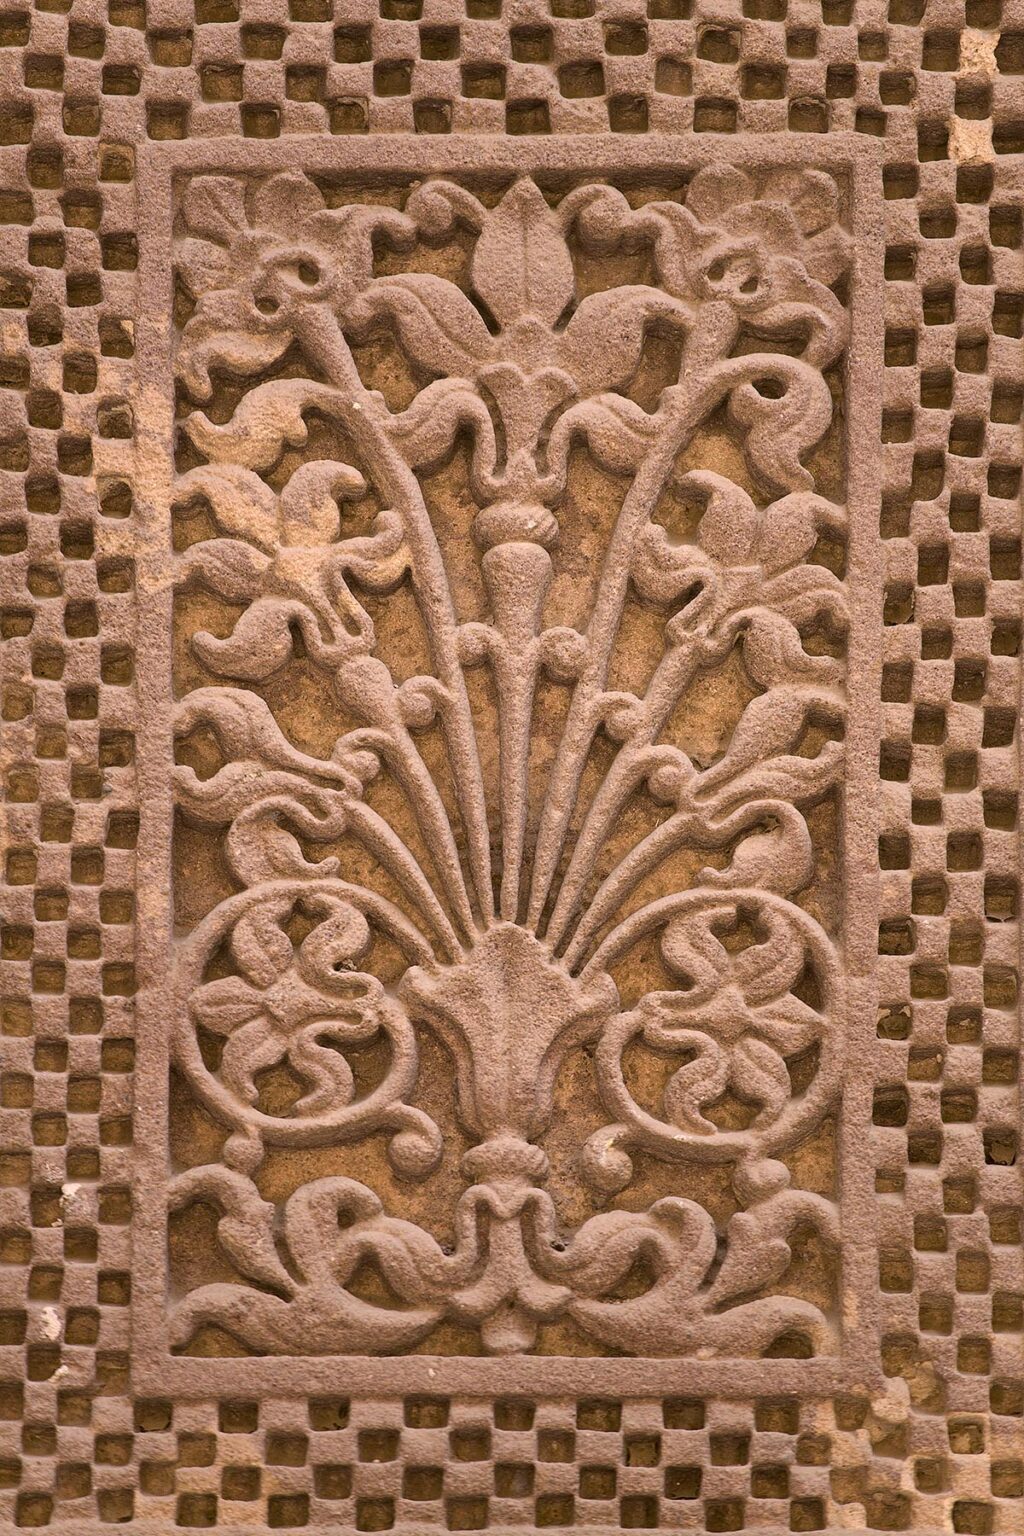 Stone carved flowers in the HOLI CHOWK COURTYARD in the MEHERANGARH FORT built by Maharaja Man Singh in 1806 - JOHDPUR, RAJASTHAN, INDIA